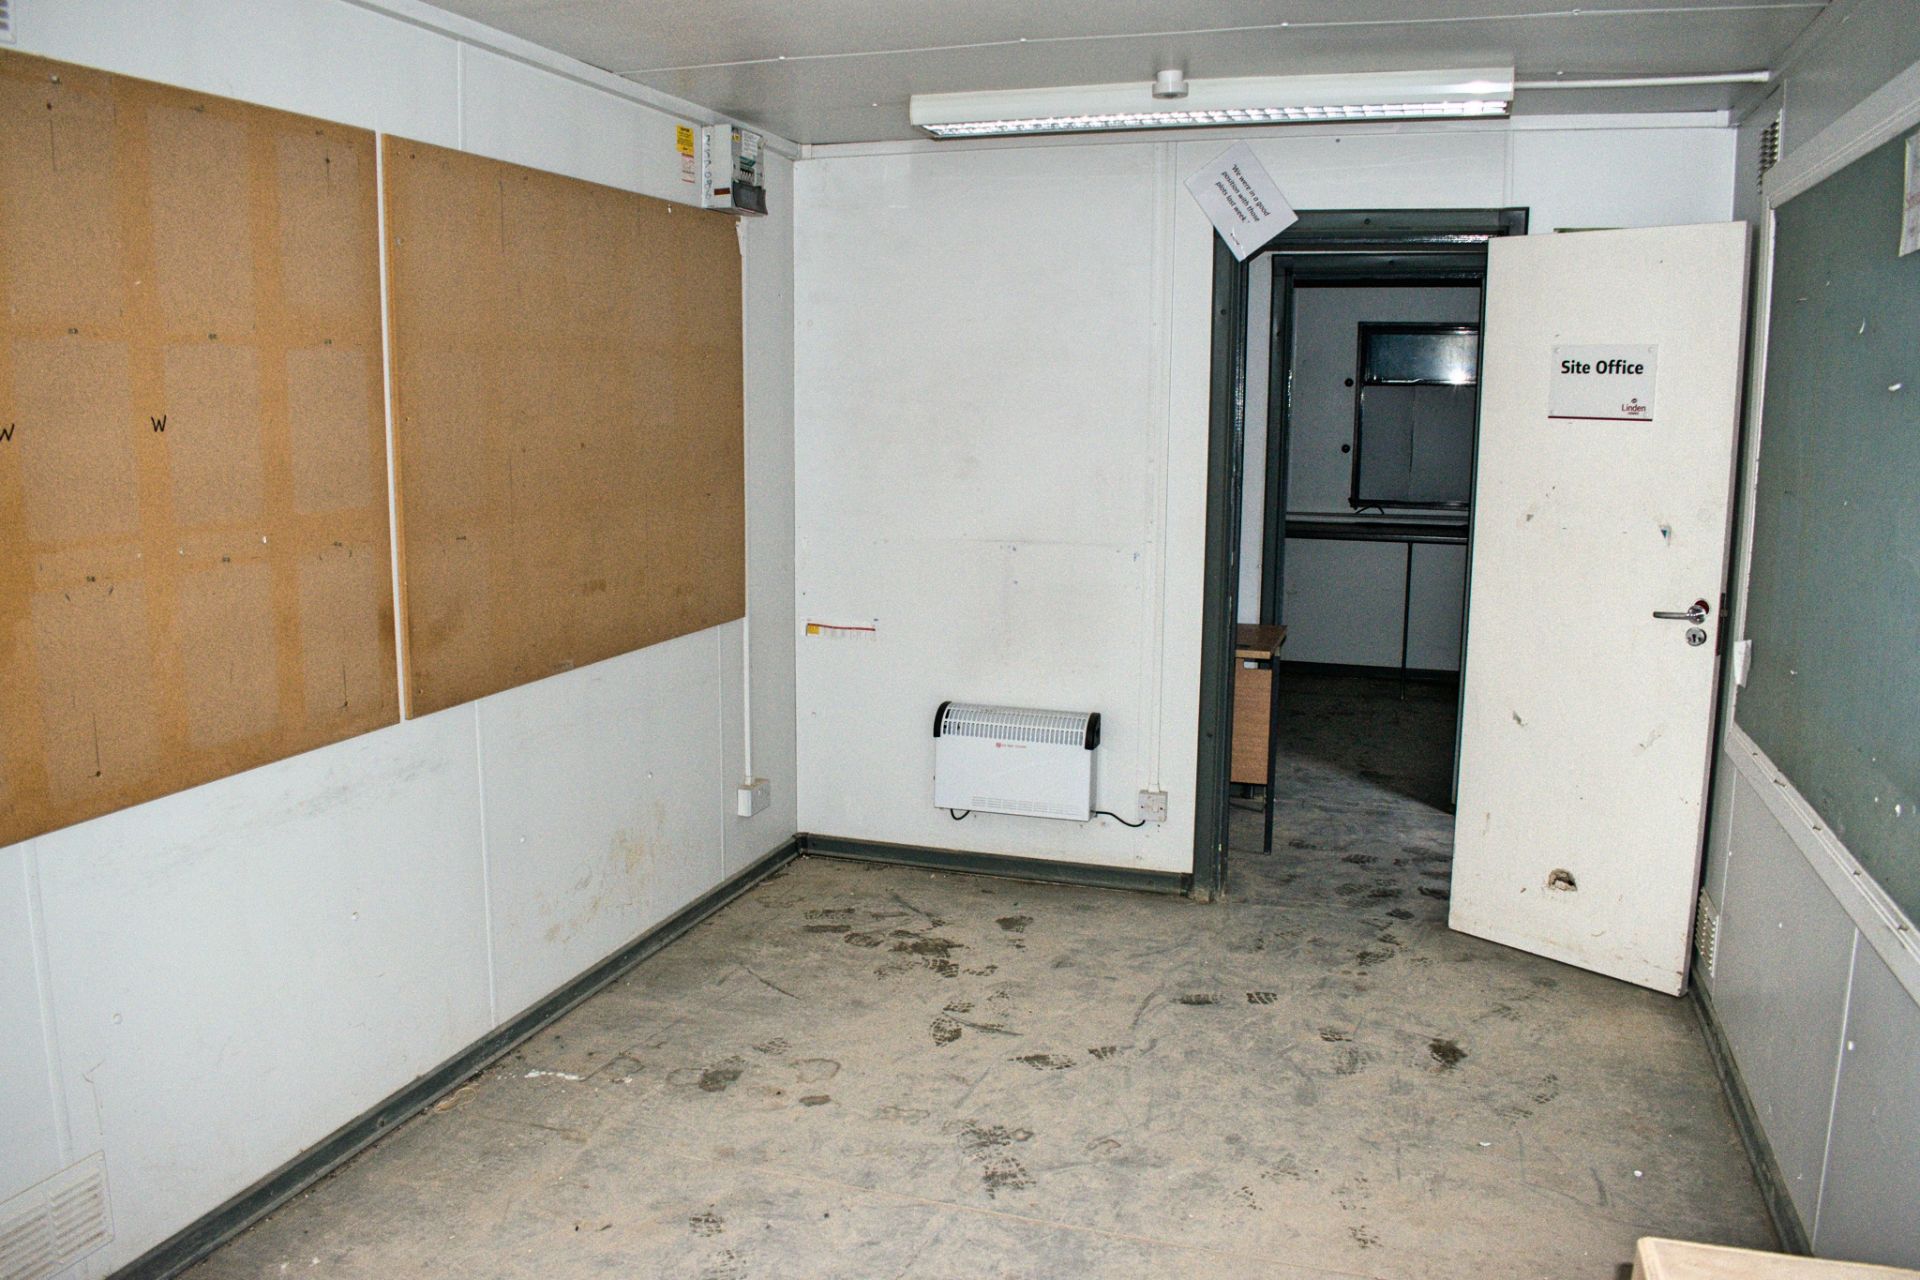 32 ft 10 ft steel anti-vandal jack leg office site unit  Comprising of: Lobby, office & canteen - Image 9 of 10